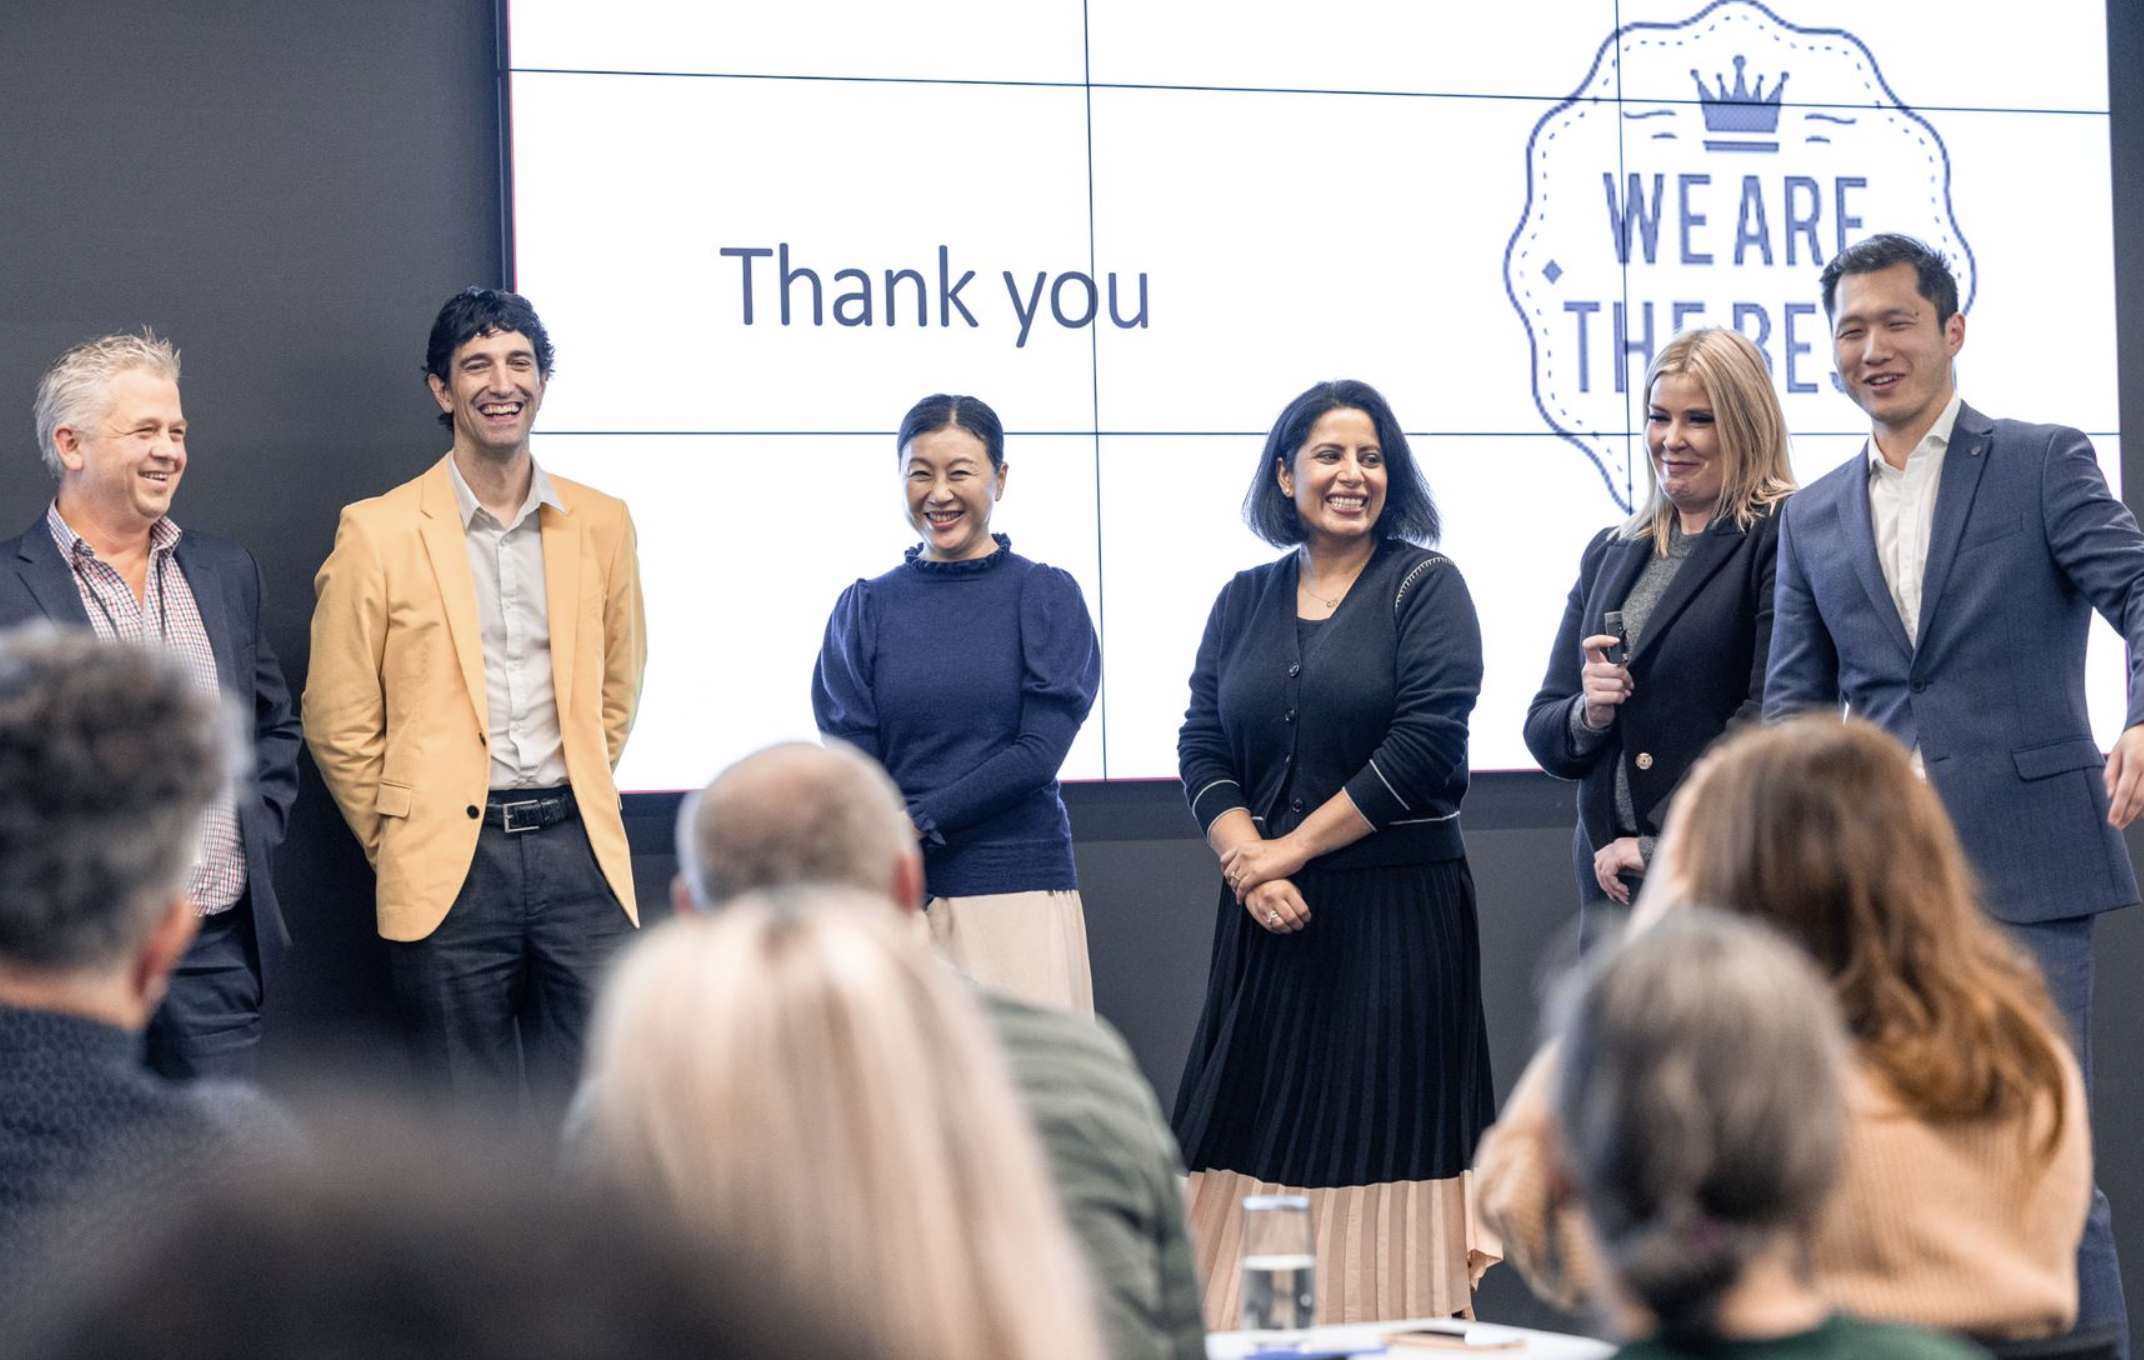 Team Best members (from left to right) Brendan Rowan, Paul Williams, Polly Wu, Reet Virk, Kate McKenzie and Ray Li pitching their professional development solution 'Climb'.